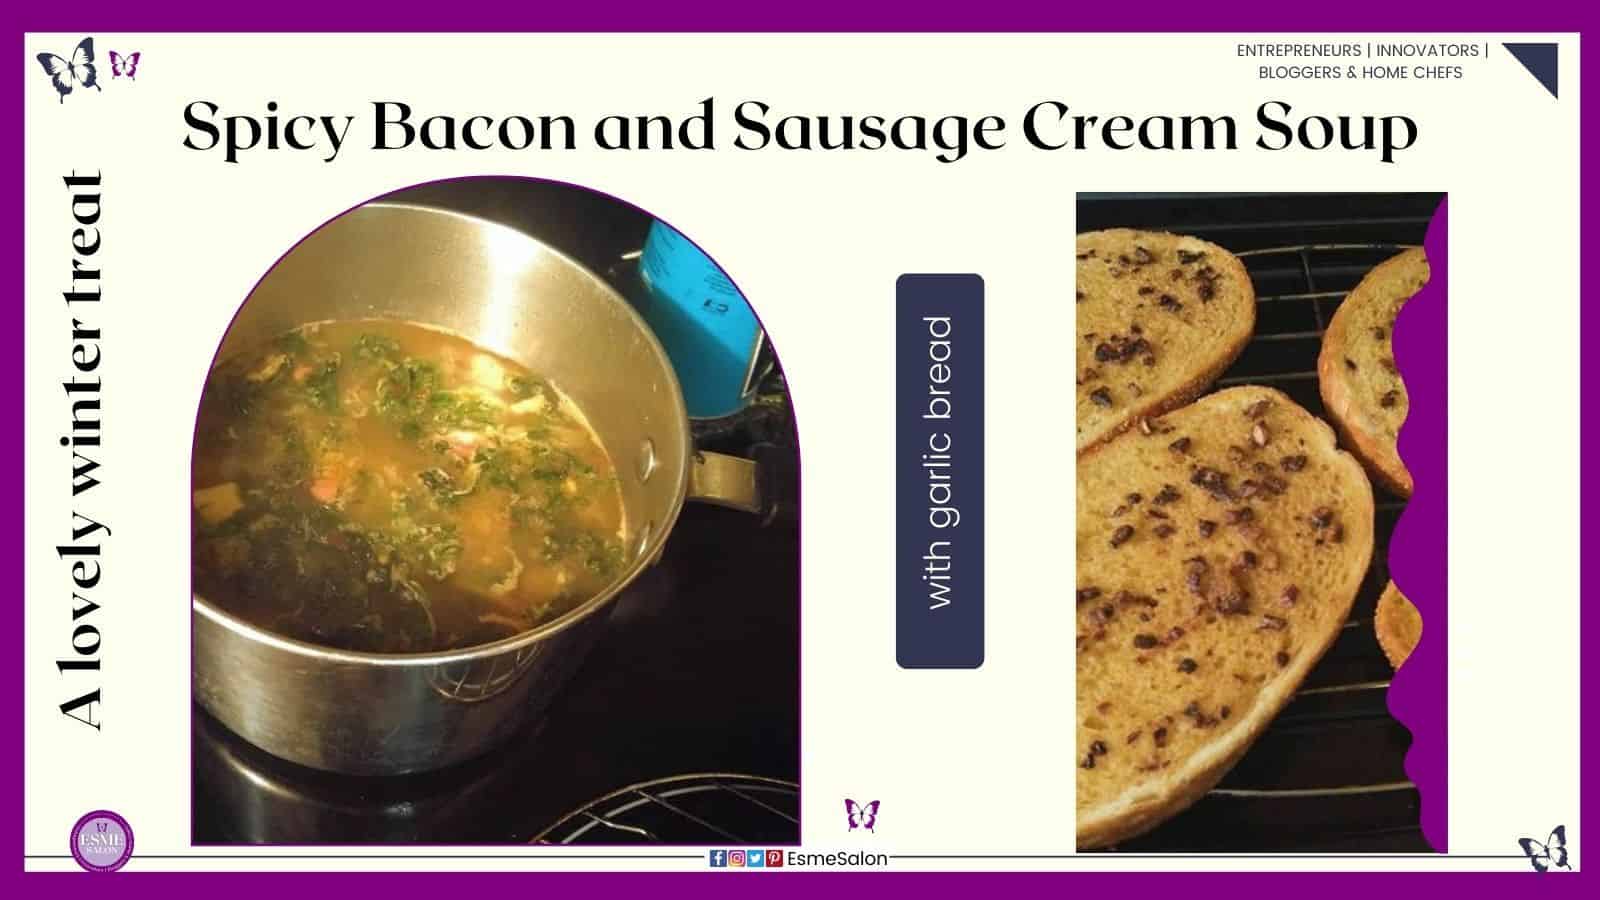 an image of a pot of Spicy Bacon and Sausage Cream Soup as well as garlic bread